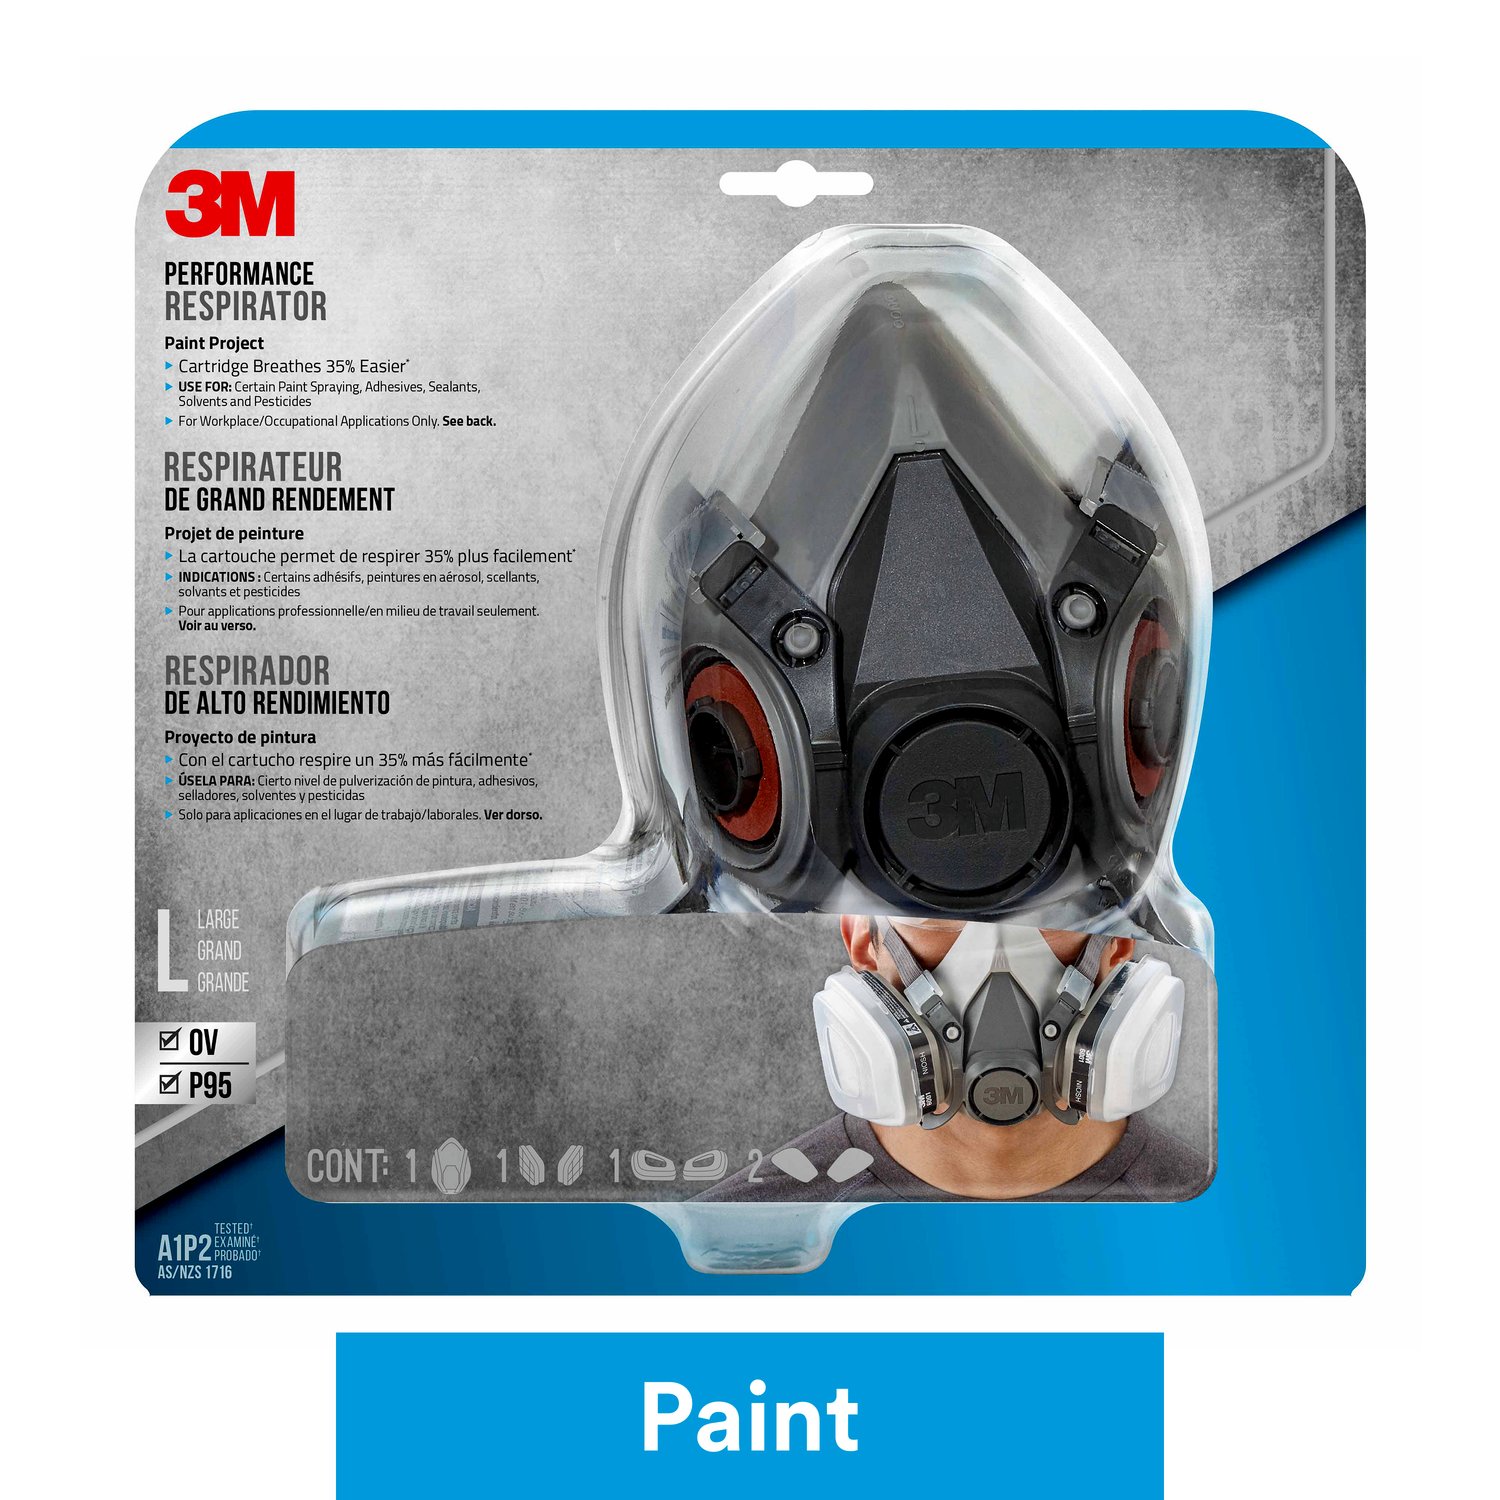 7100159322 - 3M Performance Paint Project Respirator OV/P95, 6311P1-DC, Size Large,
1 each/pack, 4 packs/case